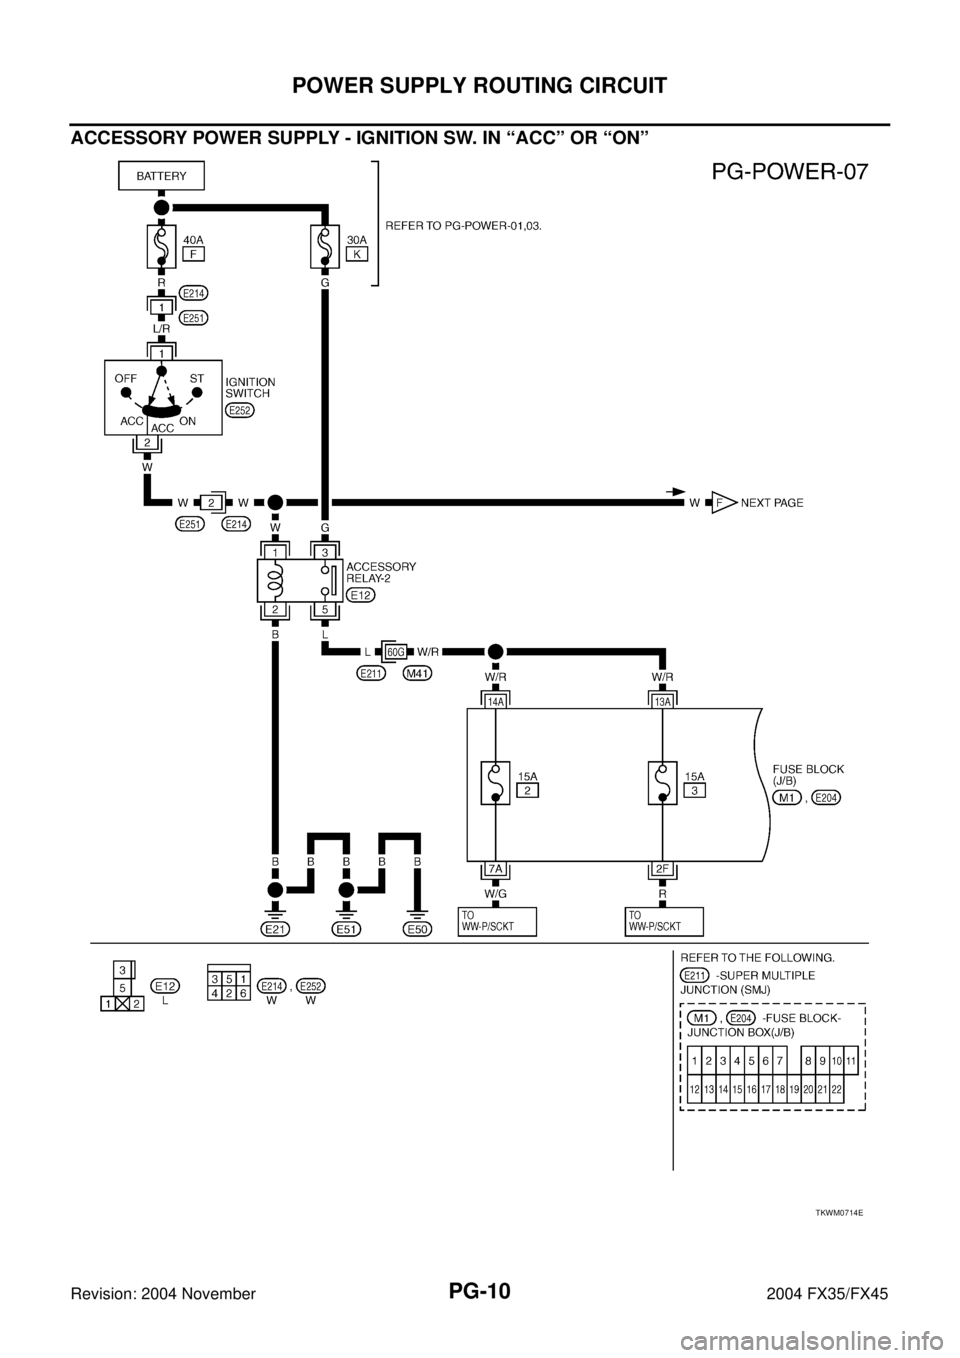 INFINITI FX35 2004  Service Manual PG-10
POWER SUPPLY ROUTING CIRCUIT
Revision: 2004 November 2004 FX35/FX45
ACCESSORY POWER SUPPLY - IGNITION SW. IN “ACC” OR “ON”
TKWM0714E 